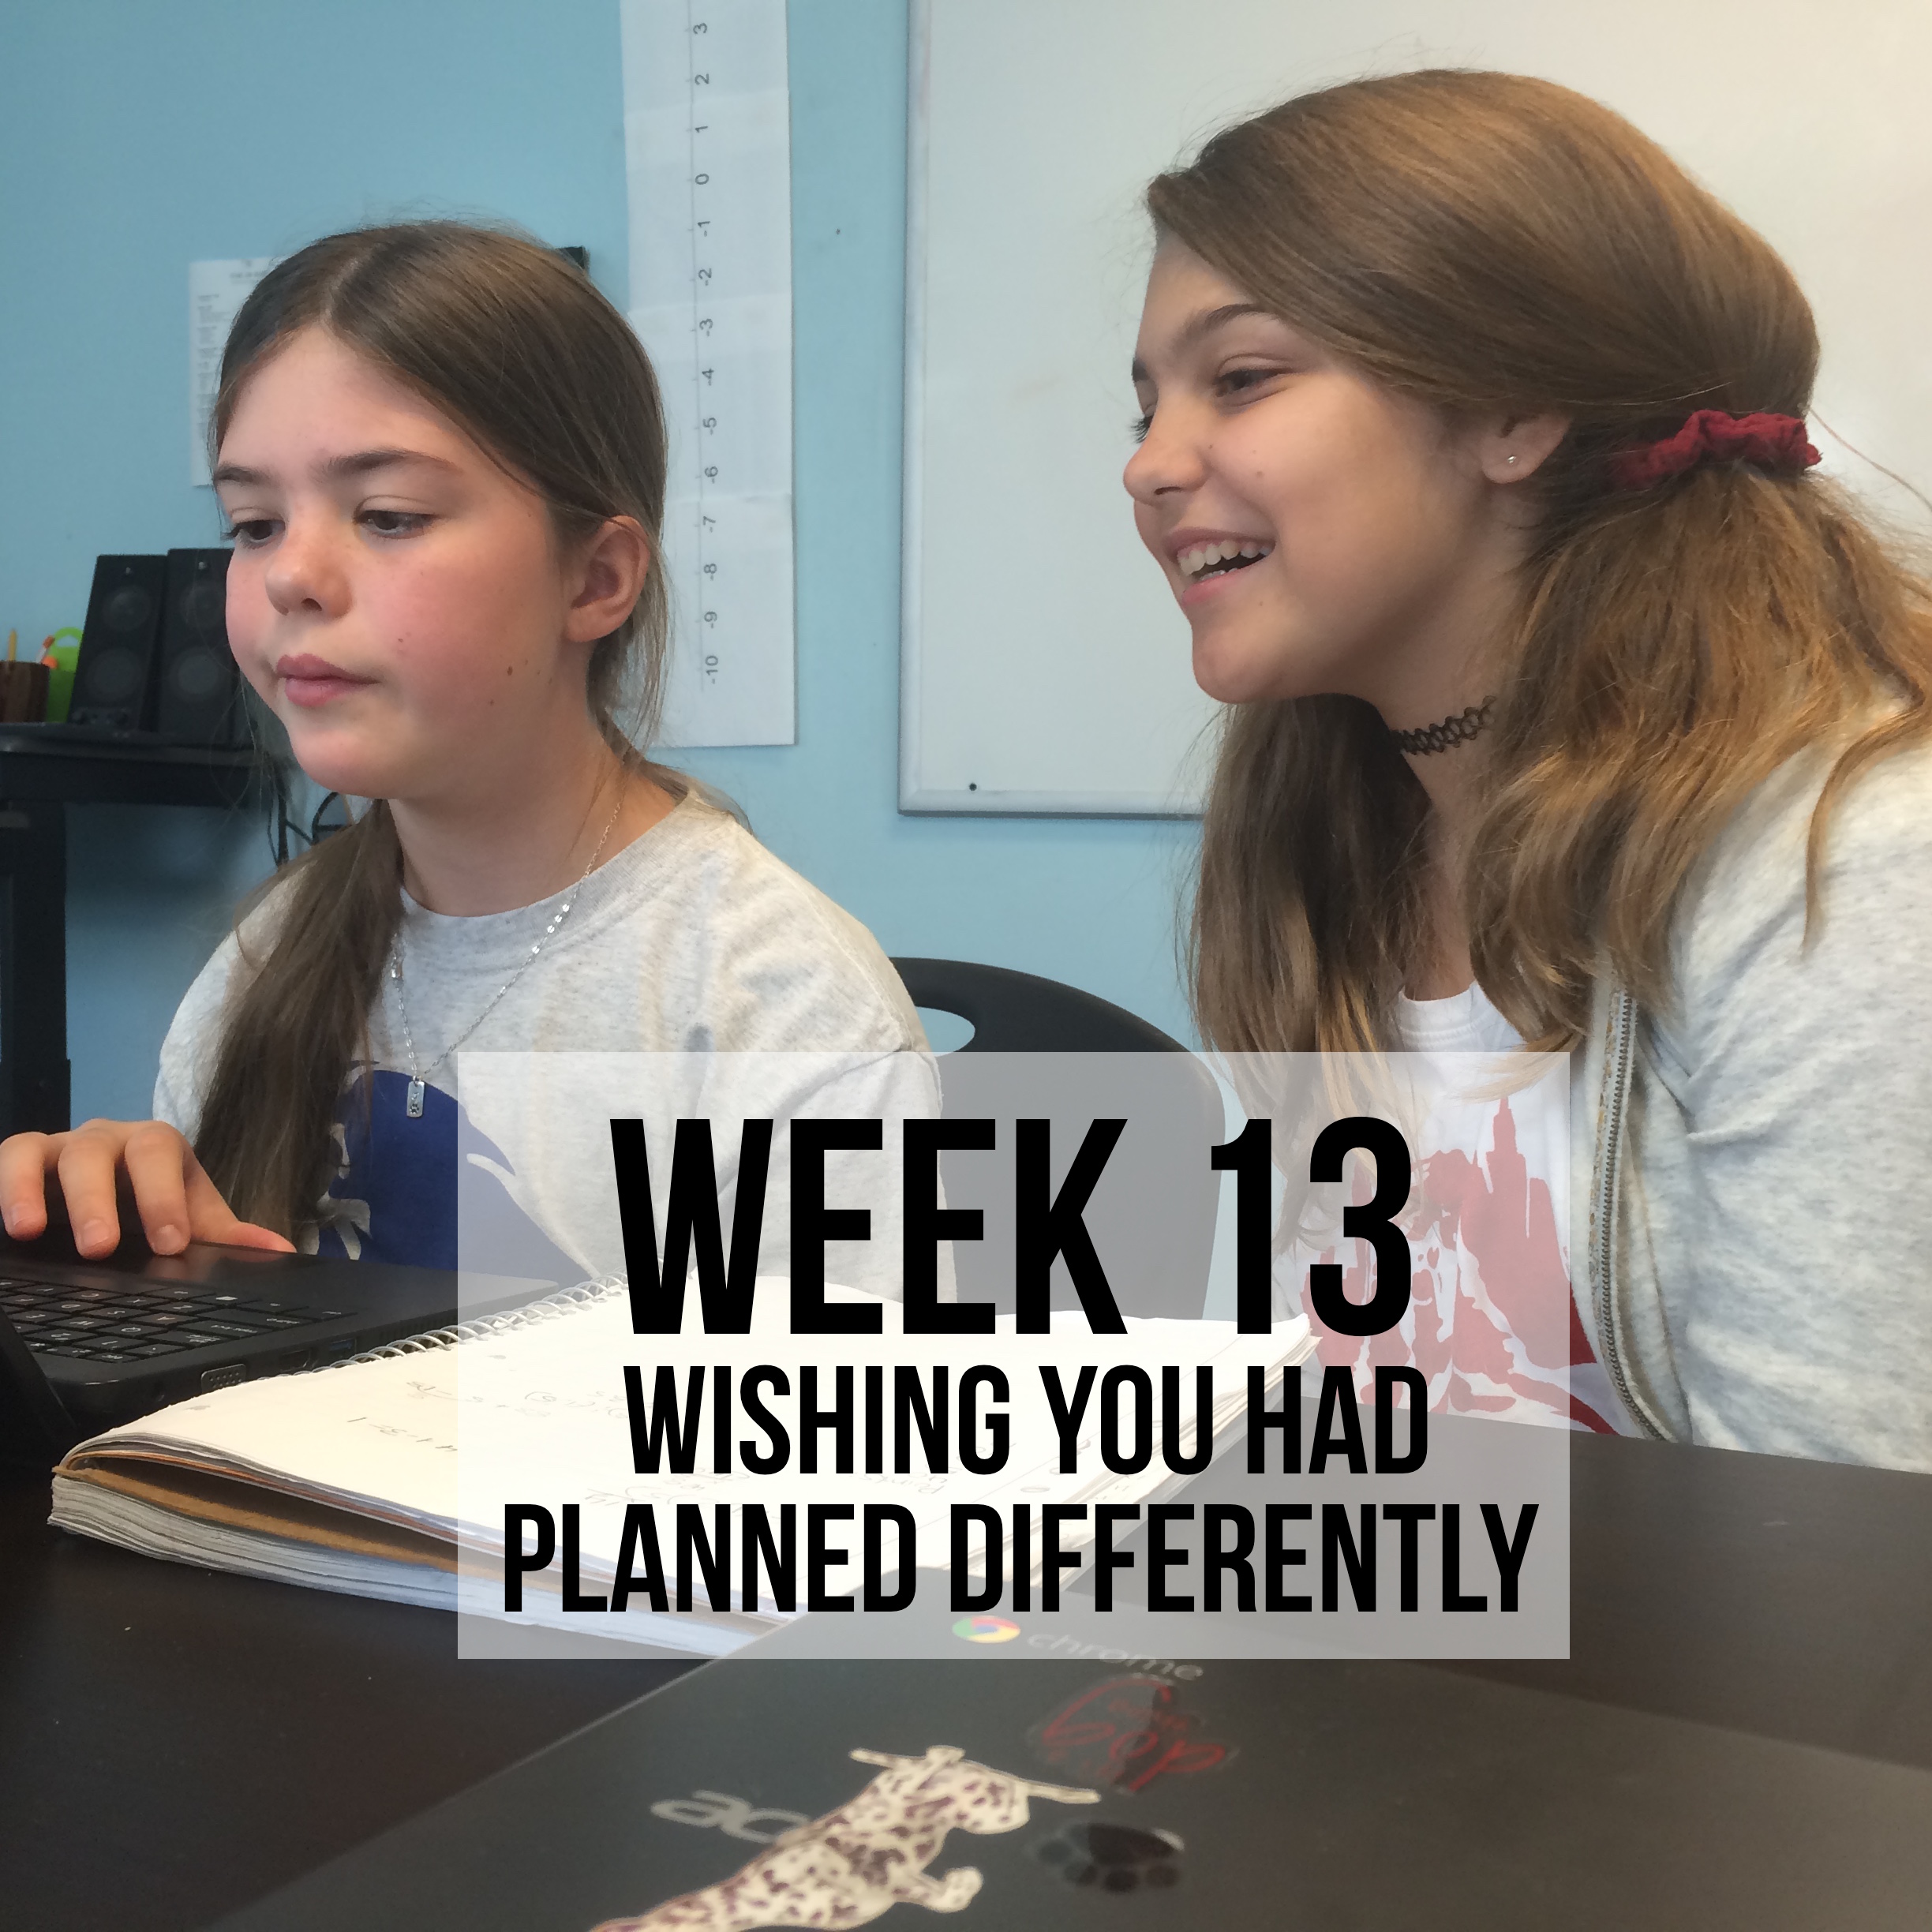 Week 13 – Wishing You Had Planned Differently